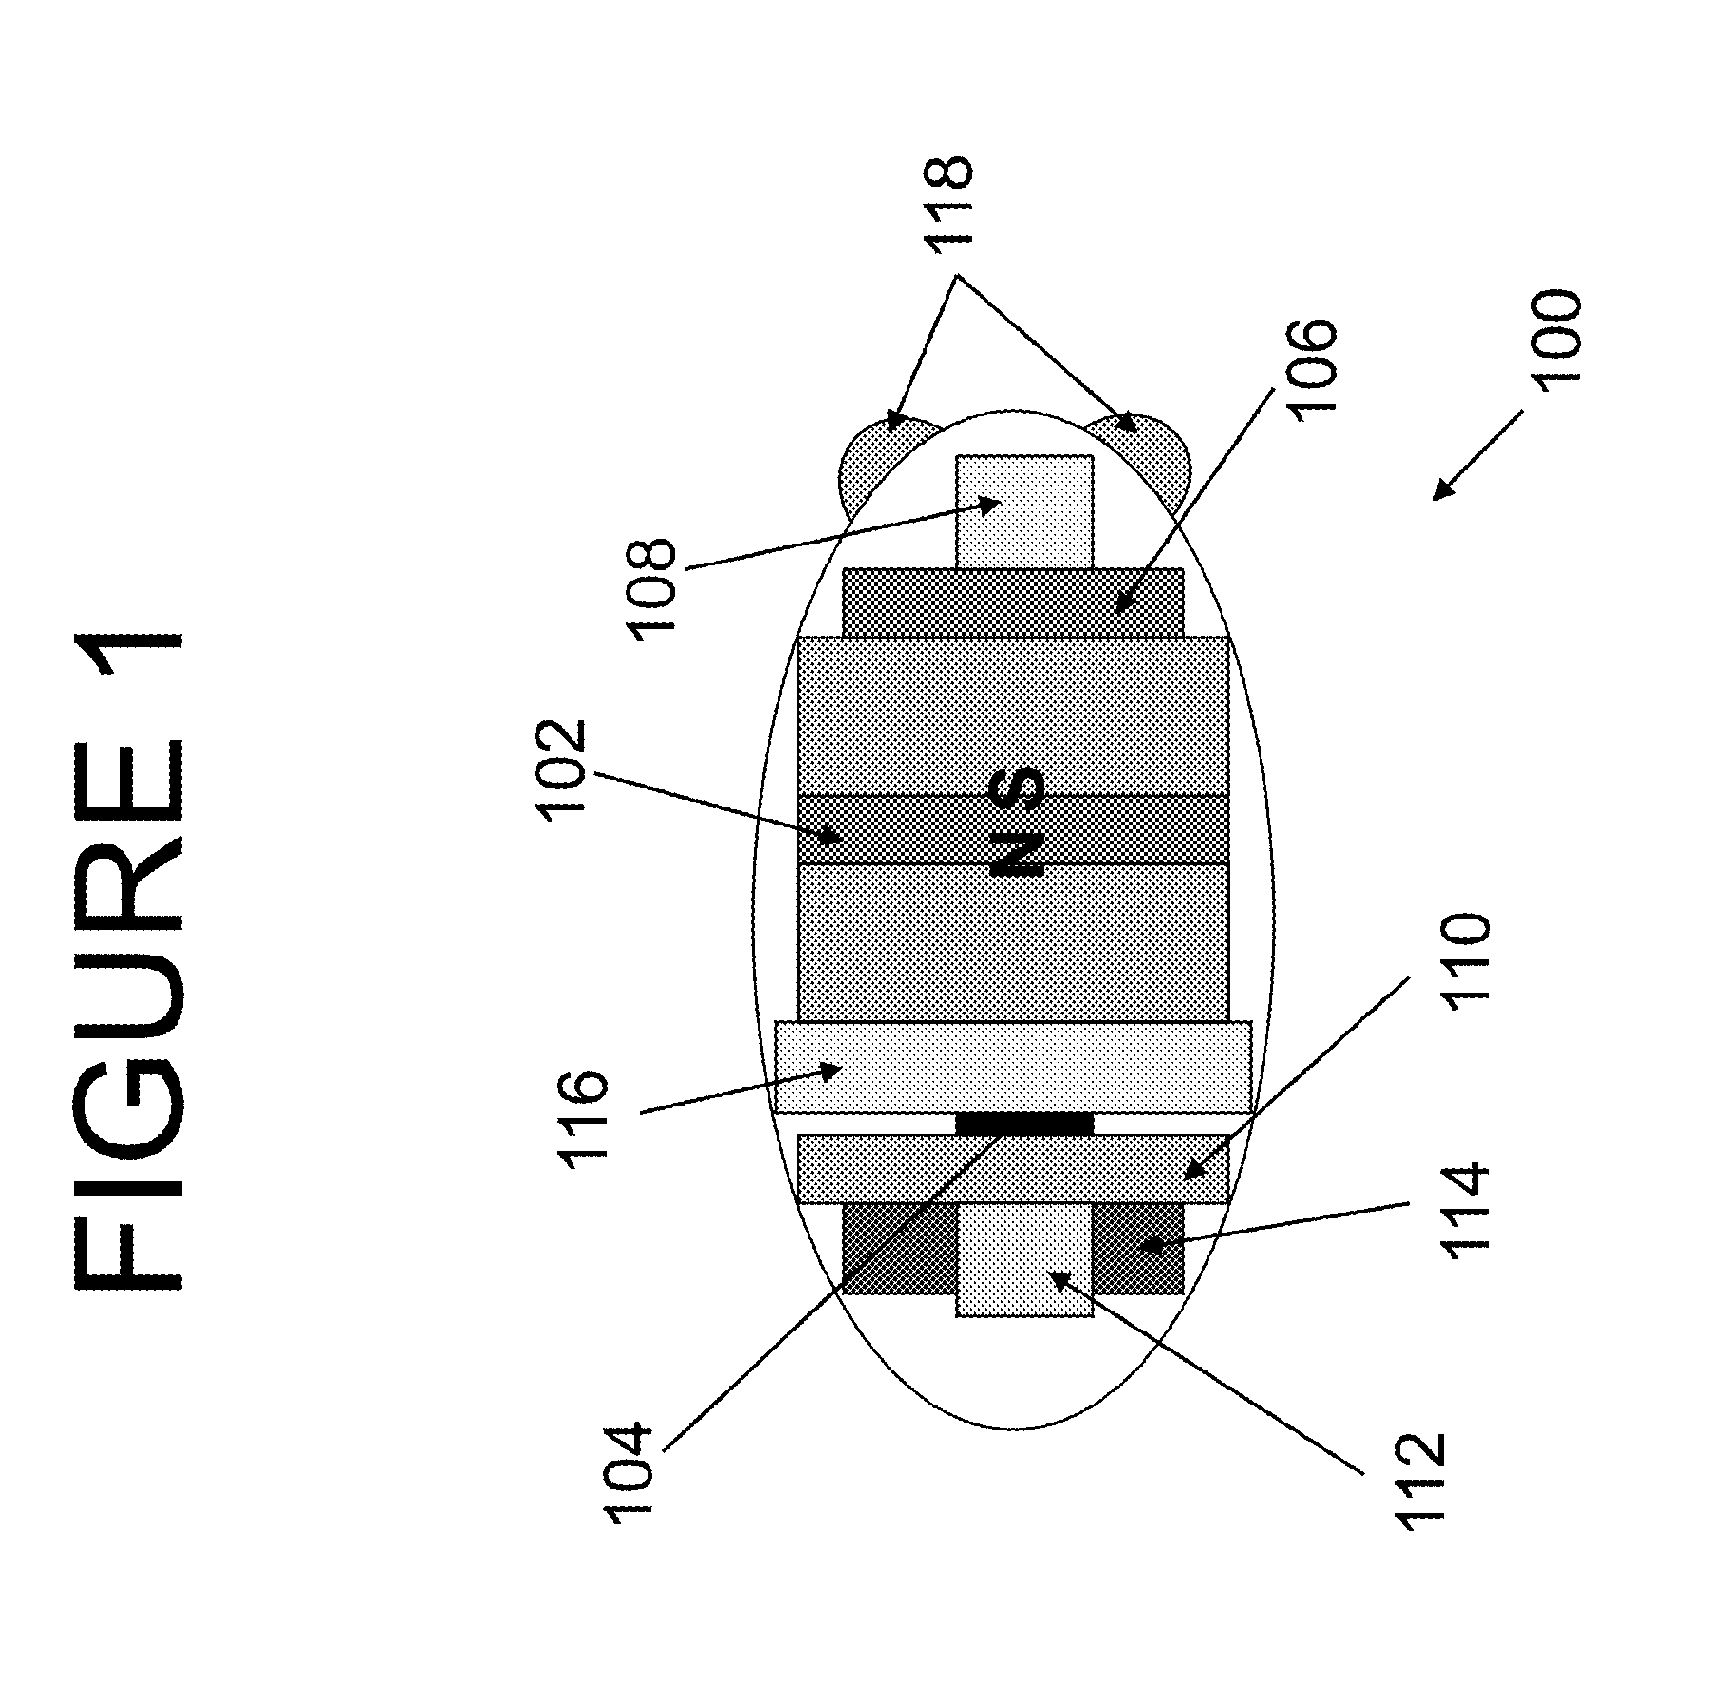 System and method for orientation and movement of remote objects